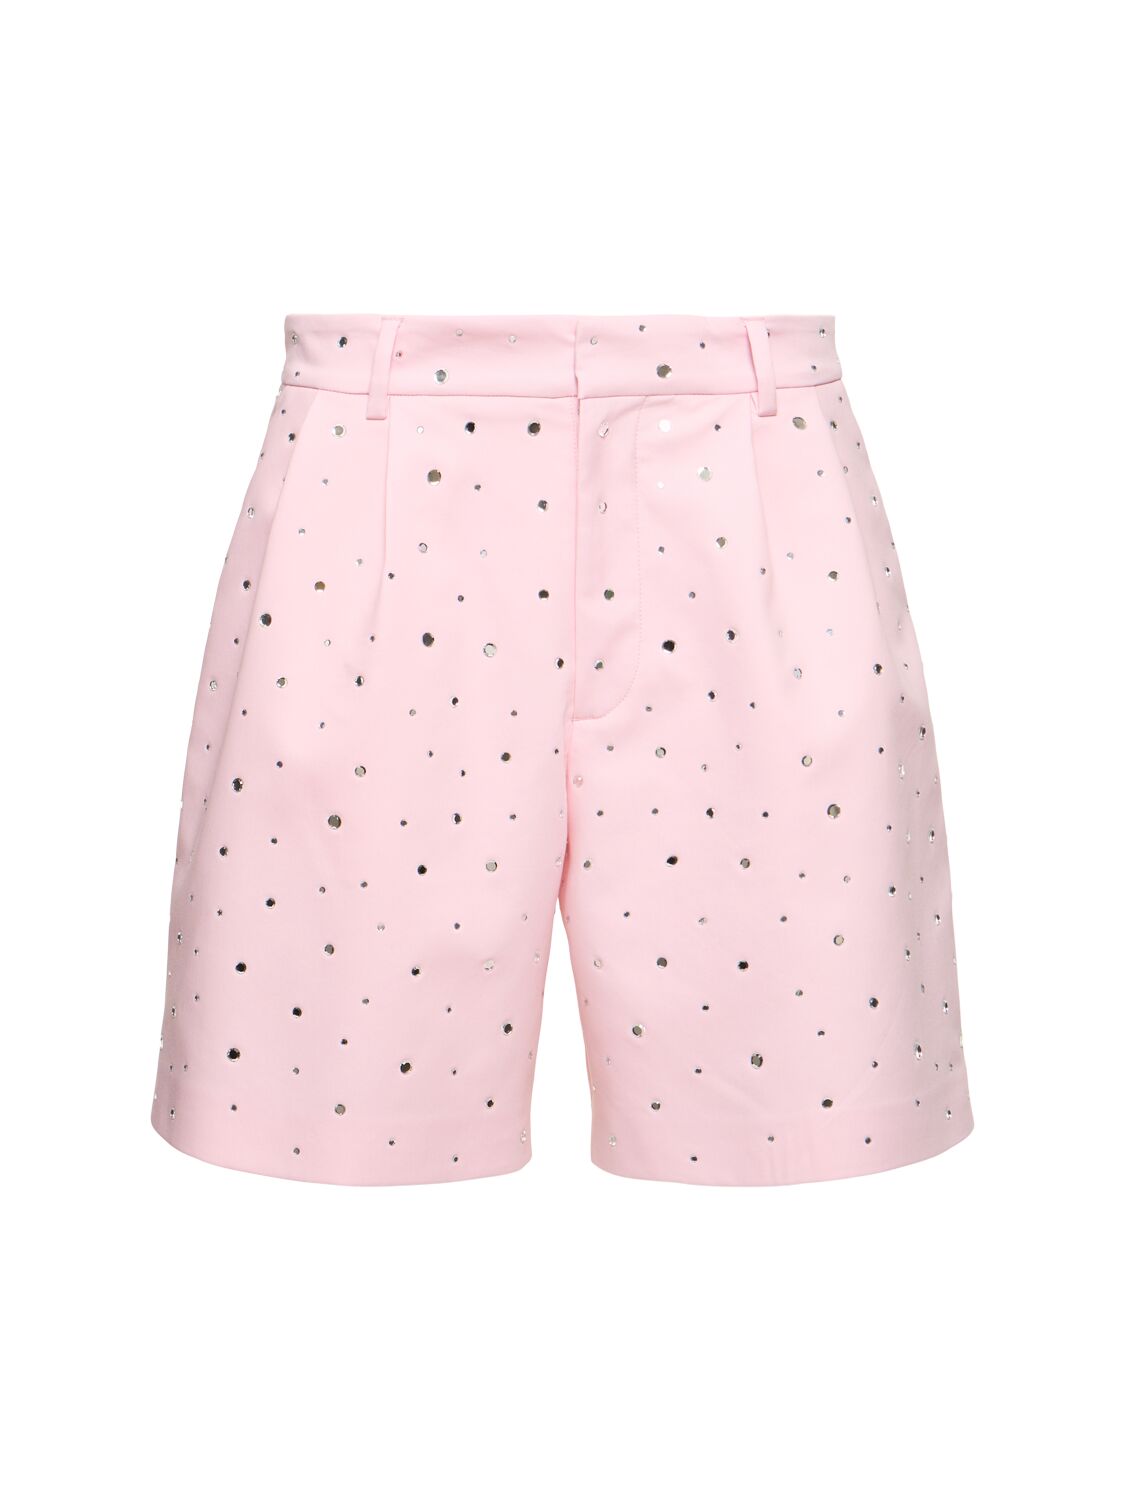 Giuseppe Di Morabito Embellished Cotton Blend Shorts In Pink